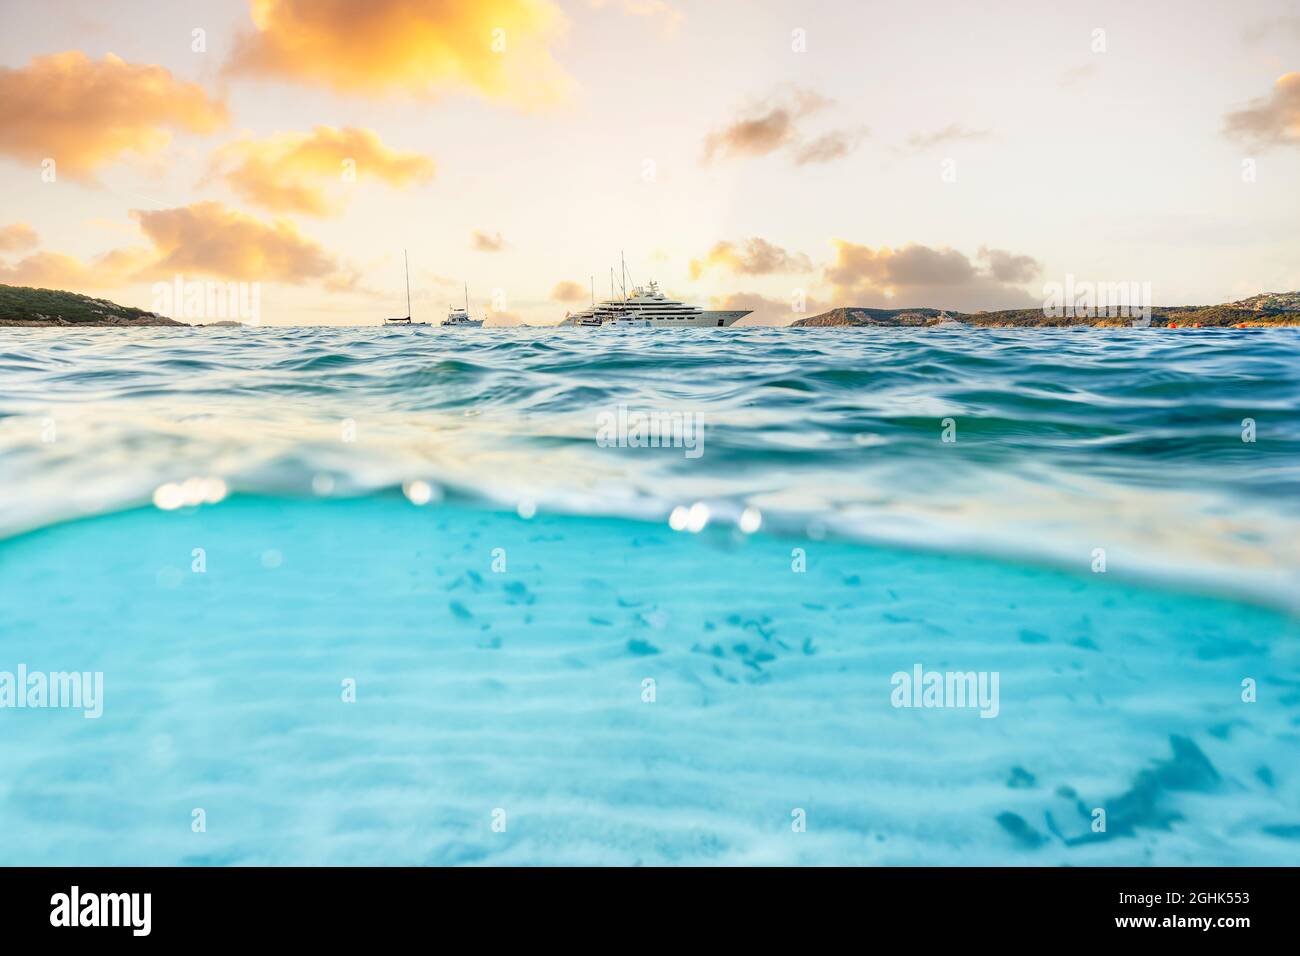 (Selective focus) Split shot, over under picture. Half underwater half sky with a luxury yacht sailing on a turquoise water during a stunning sunrise. Stock Photo